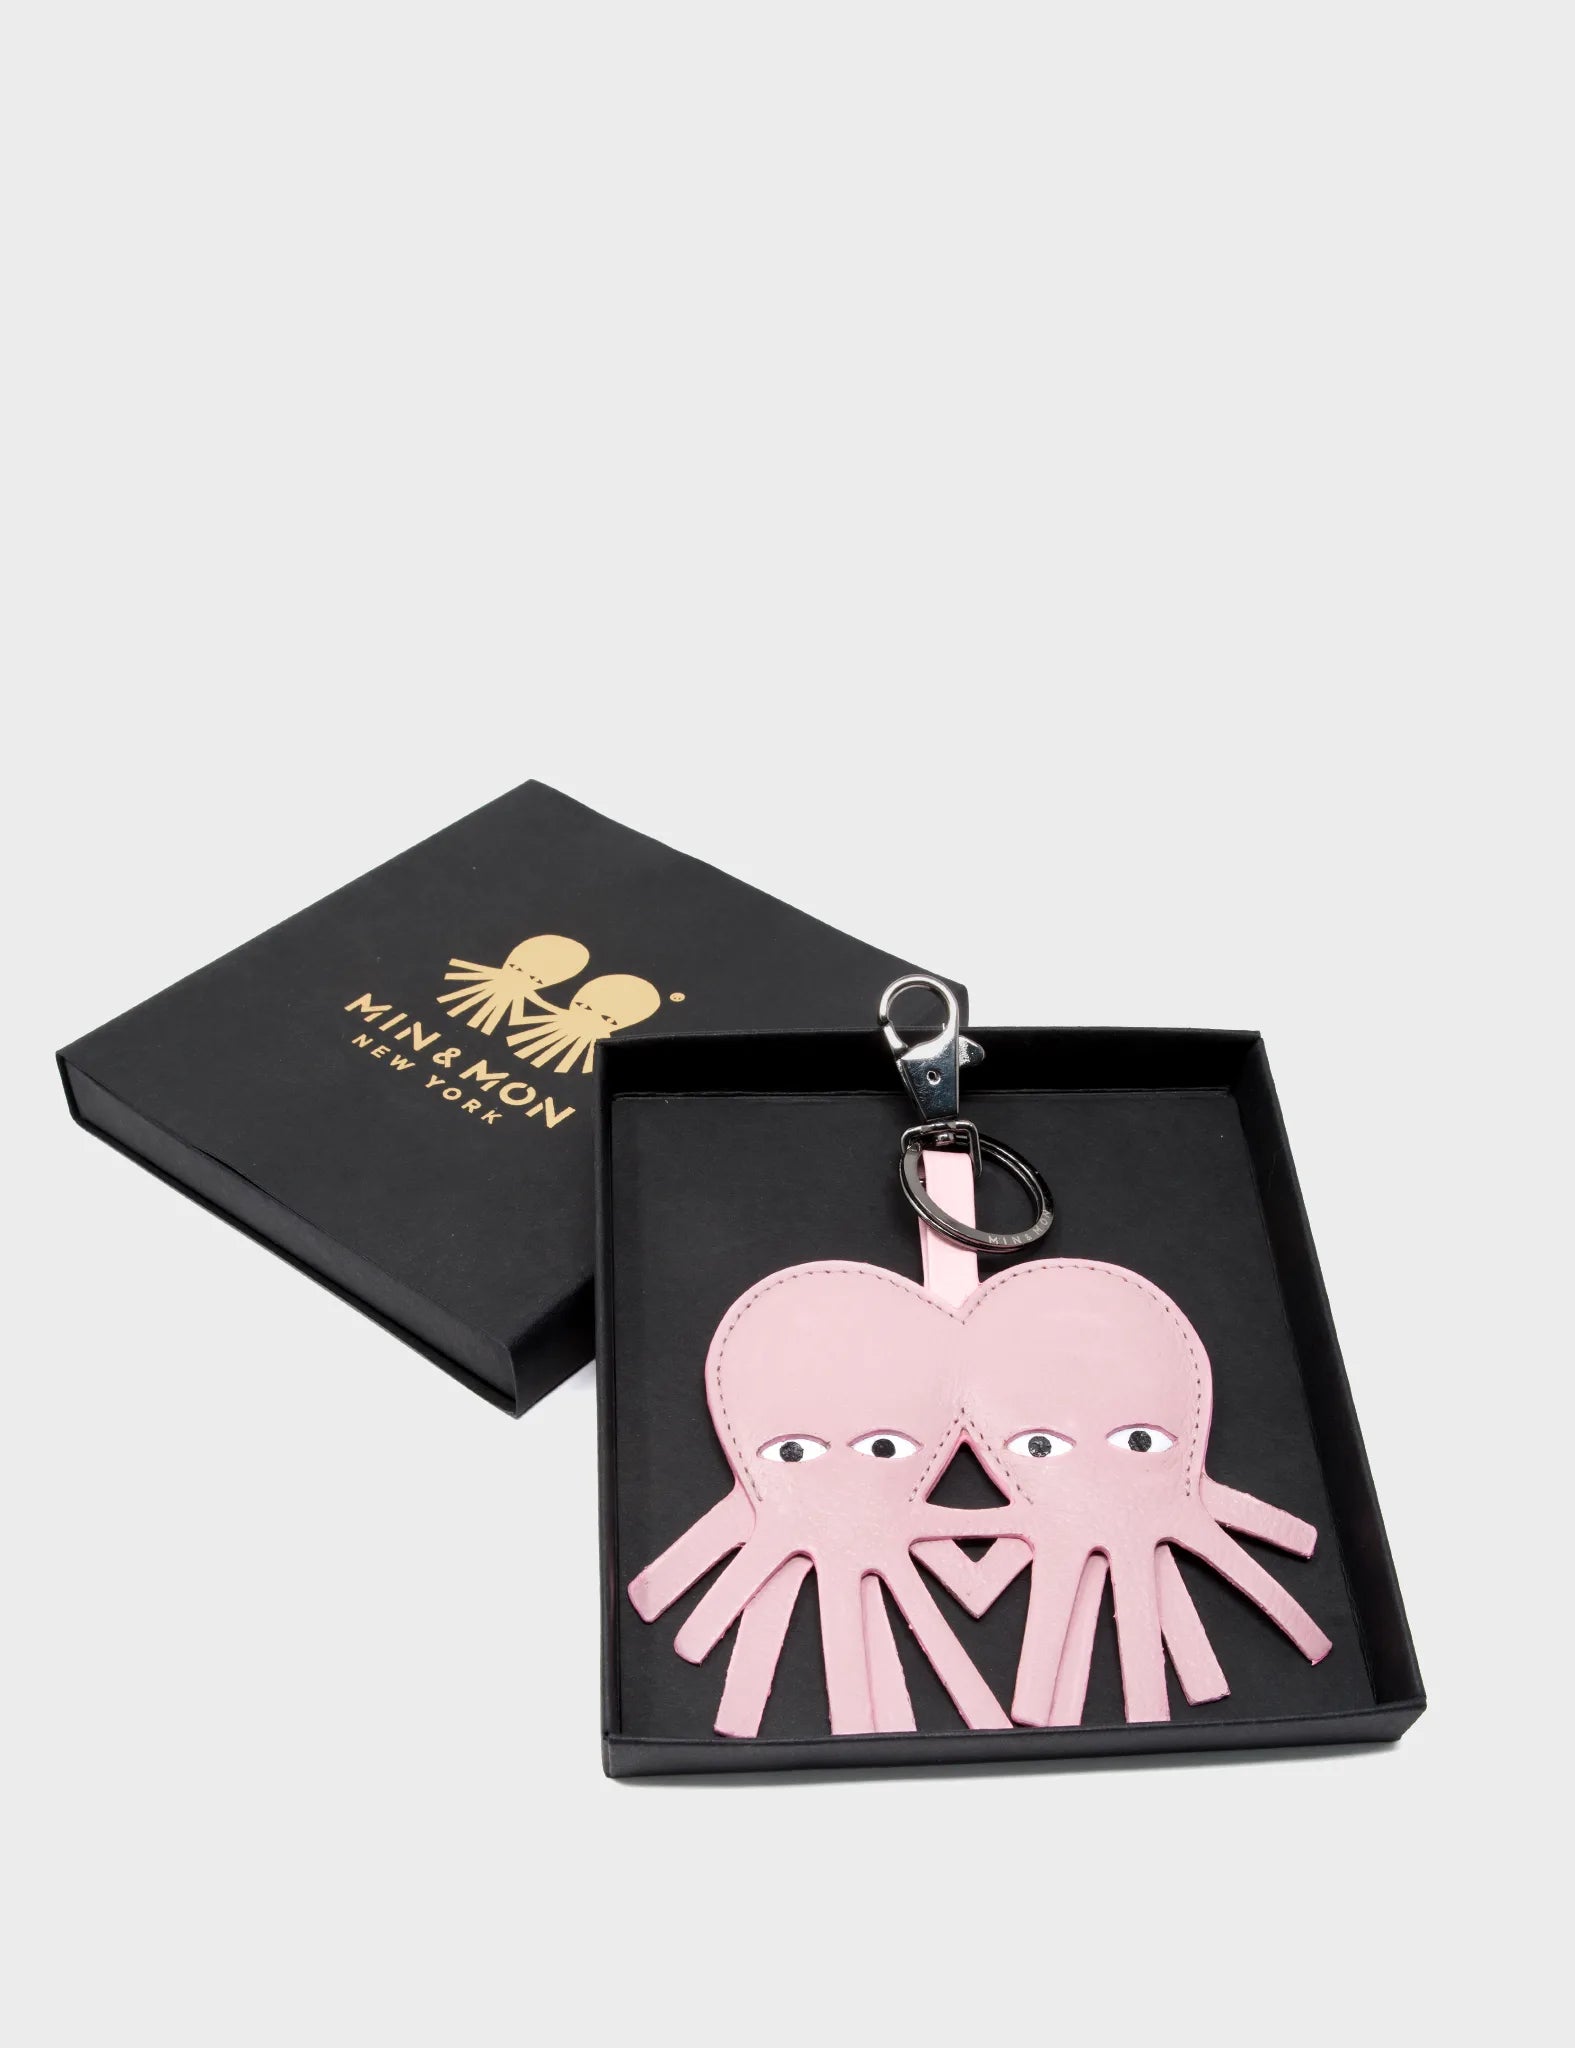 Octopus twins Charm - Blush Pink Leather Keychain - Package 